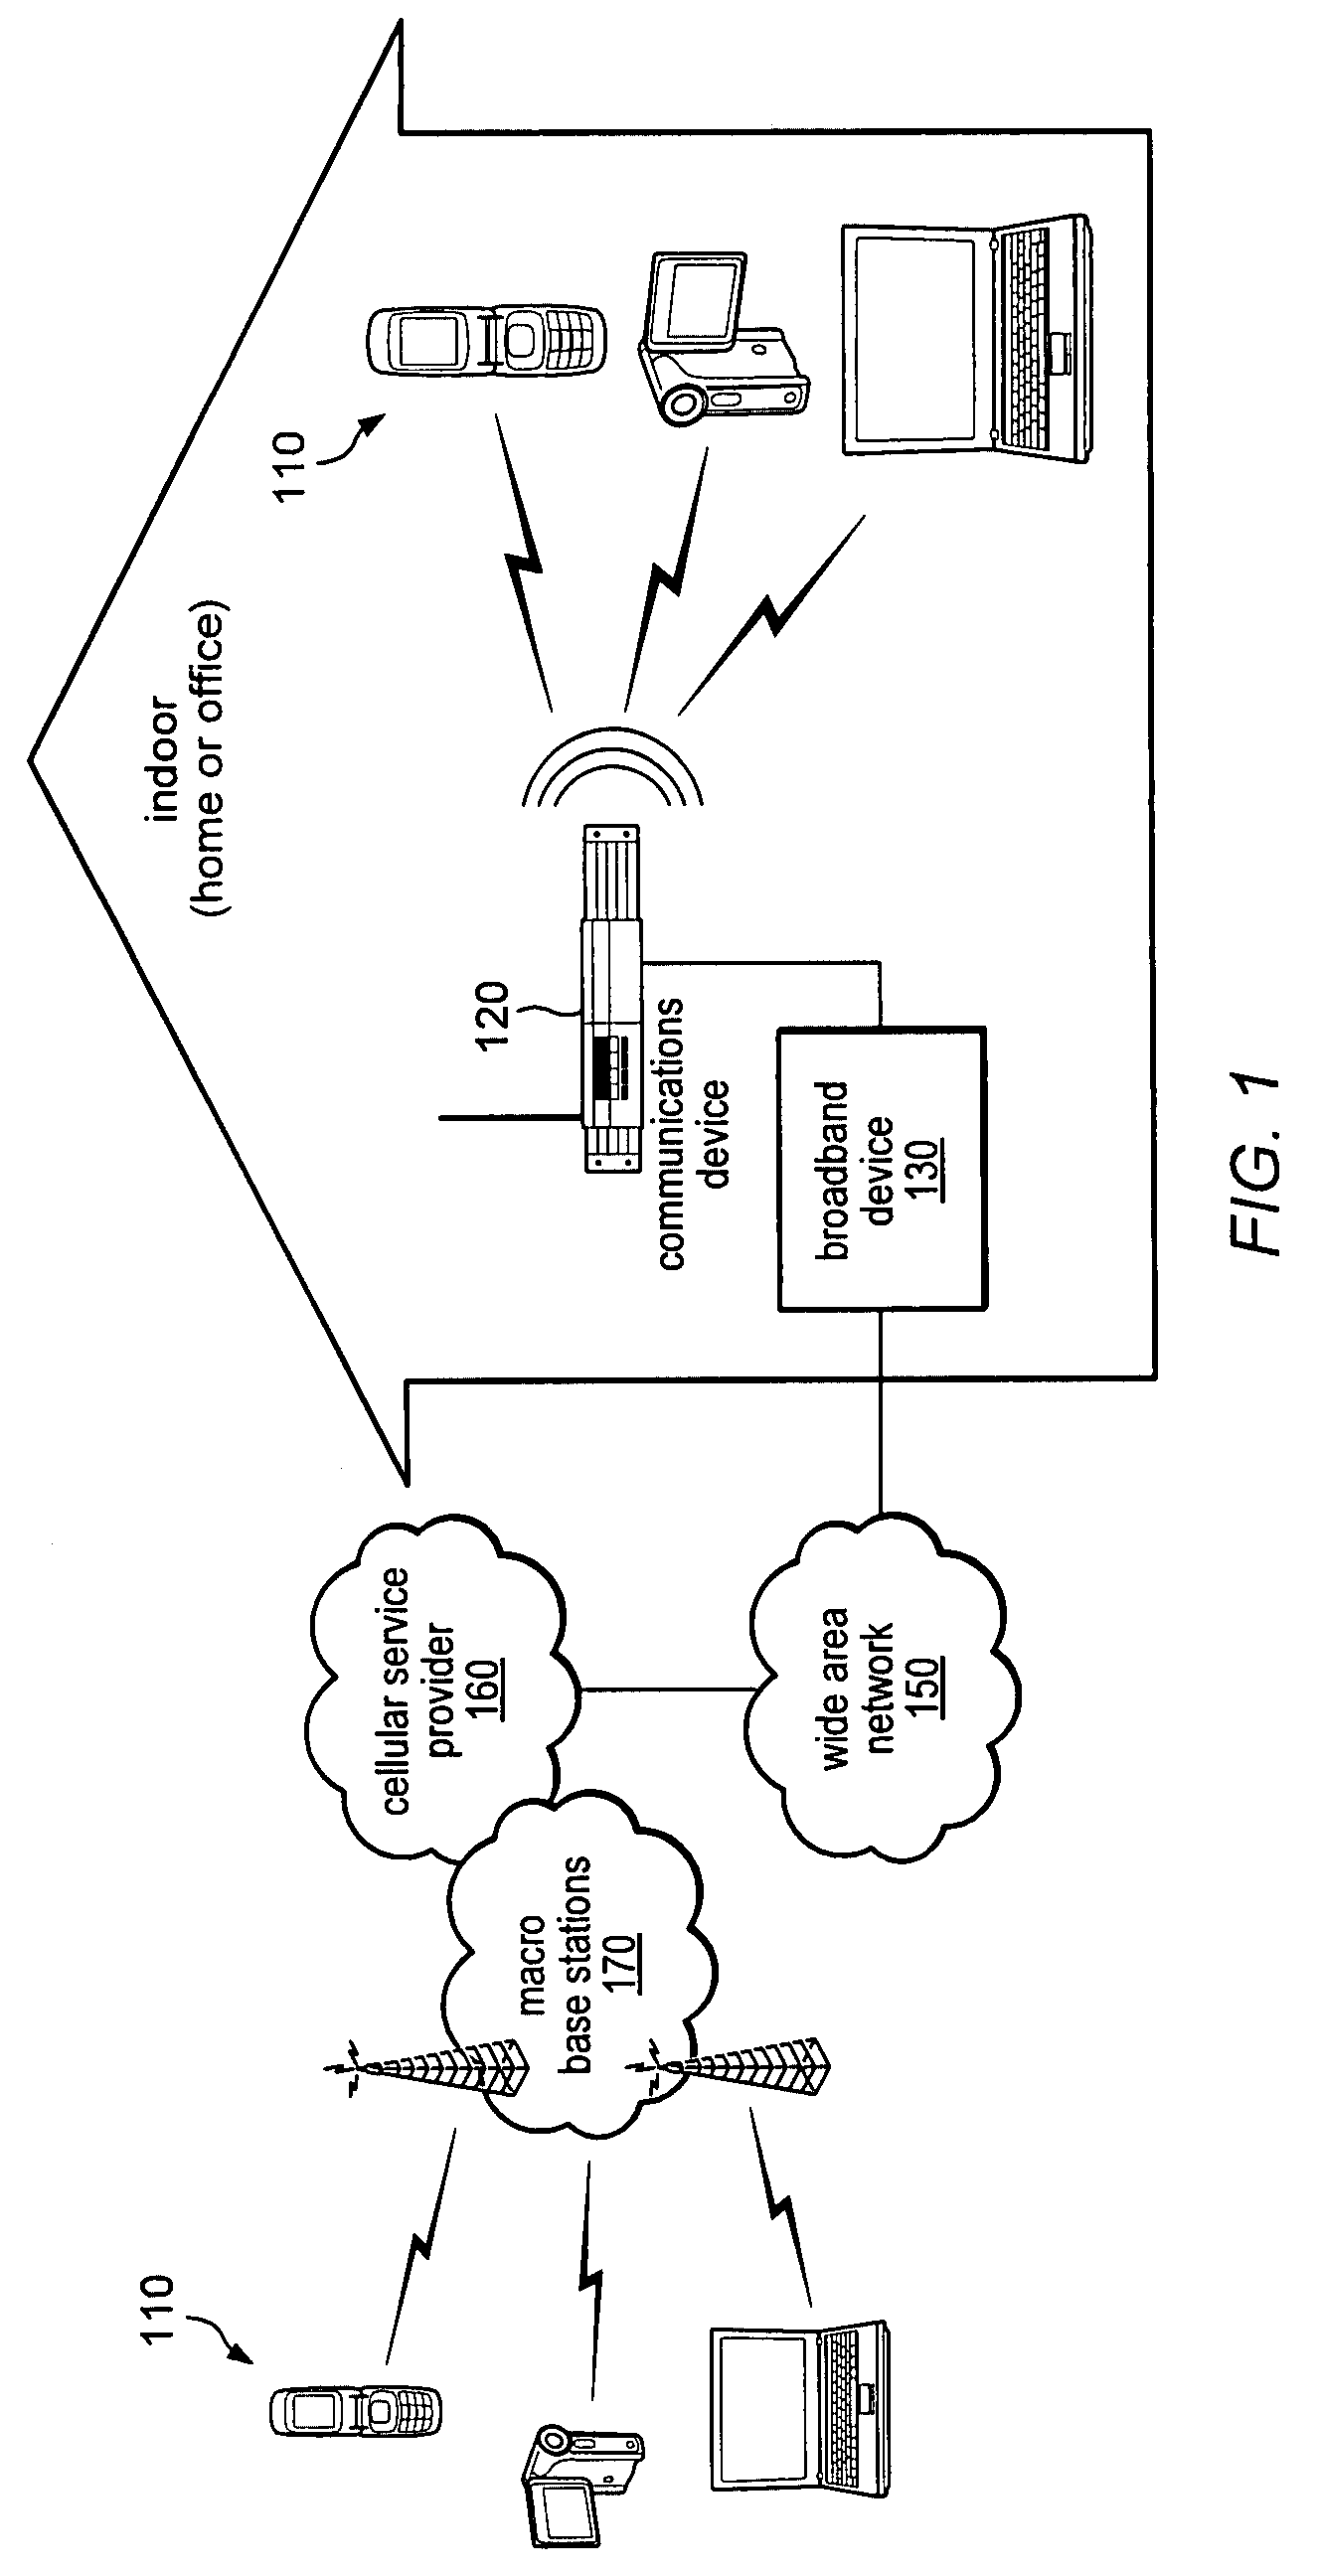 Femtocell base station with mobile station capability